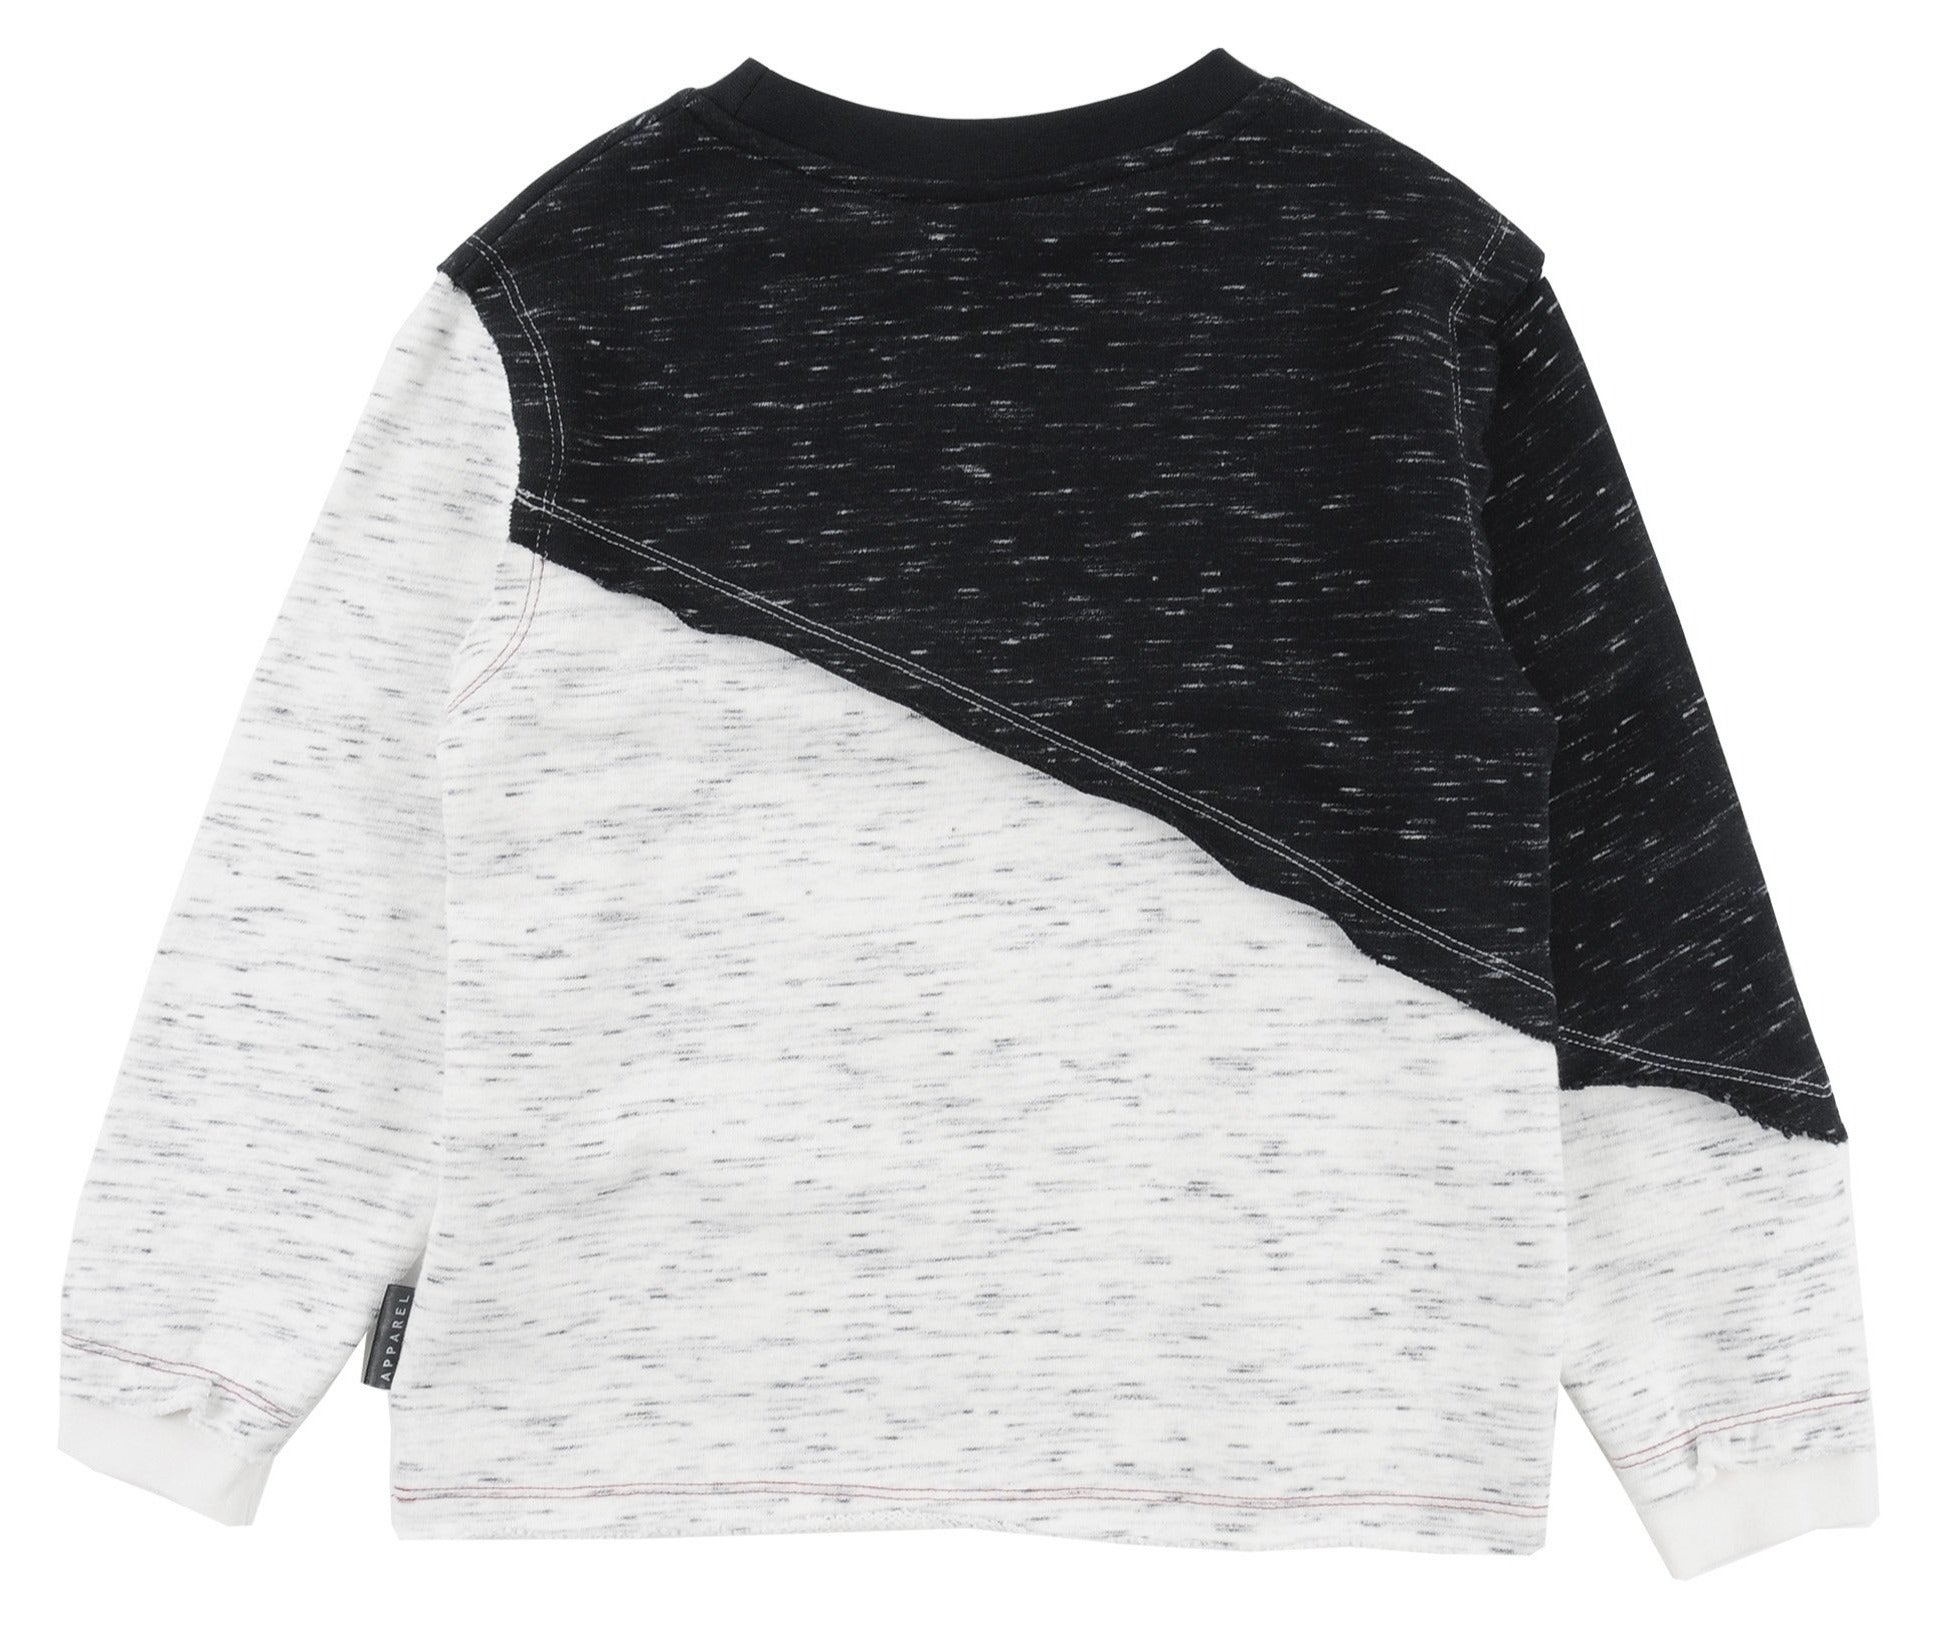 Loud Apparel Chariot Sweater